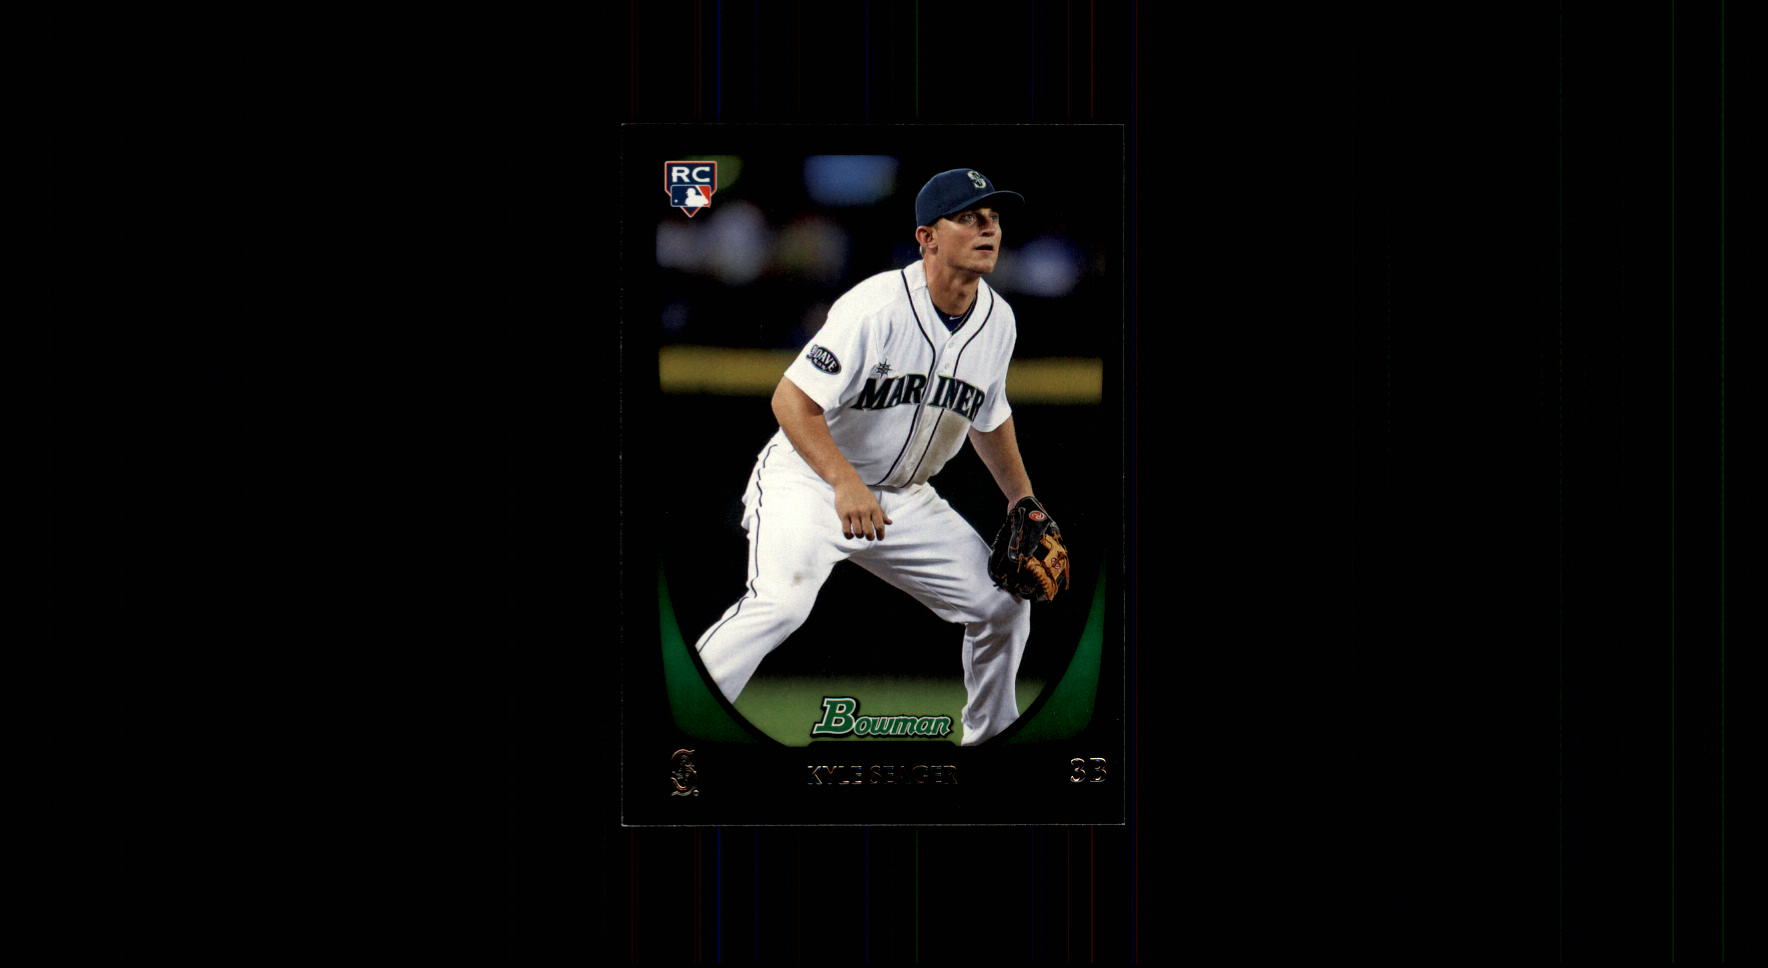 2011 Bowman Draft #103 Kyle Seager RC